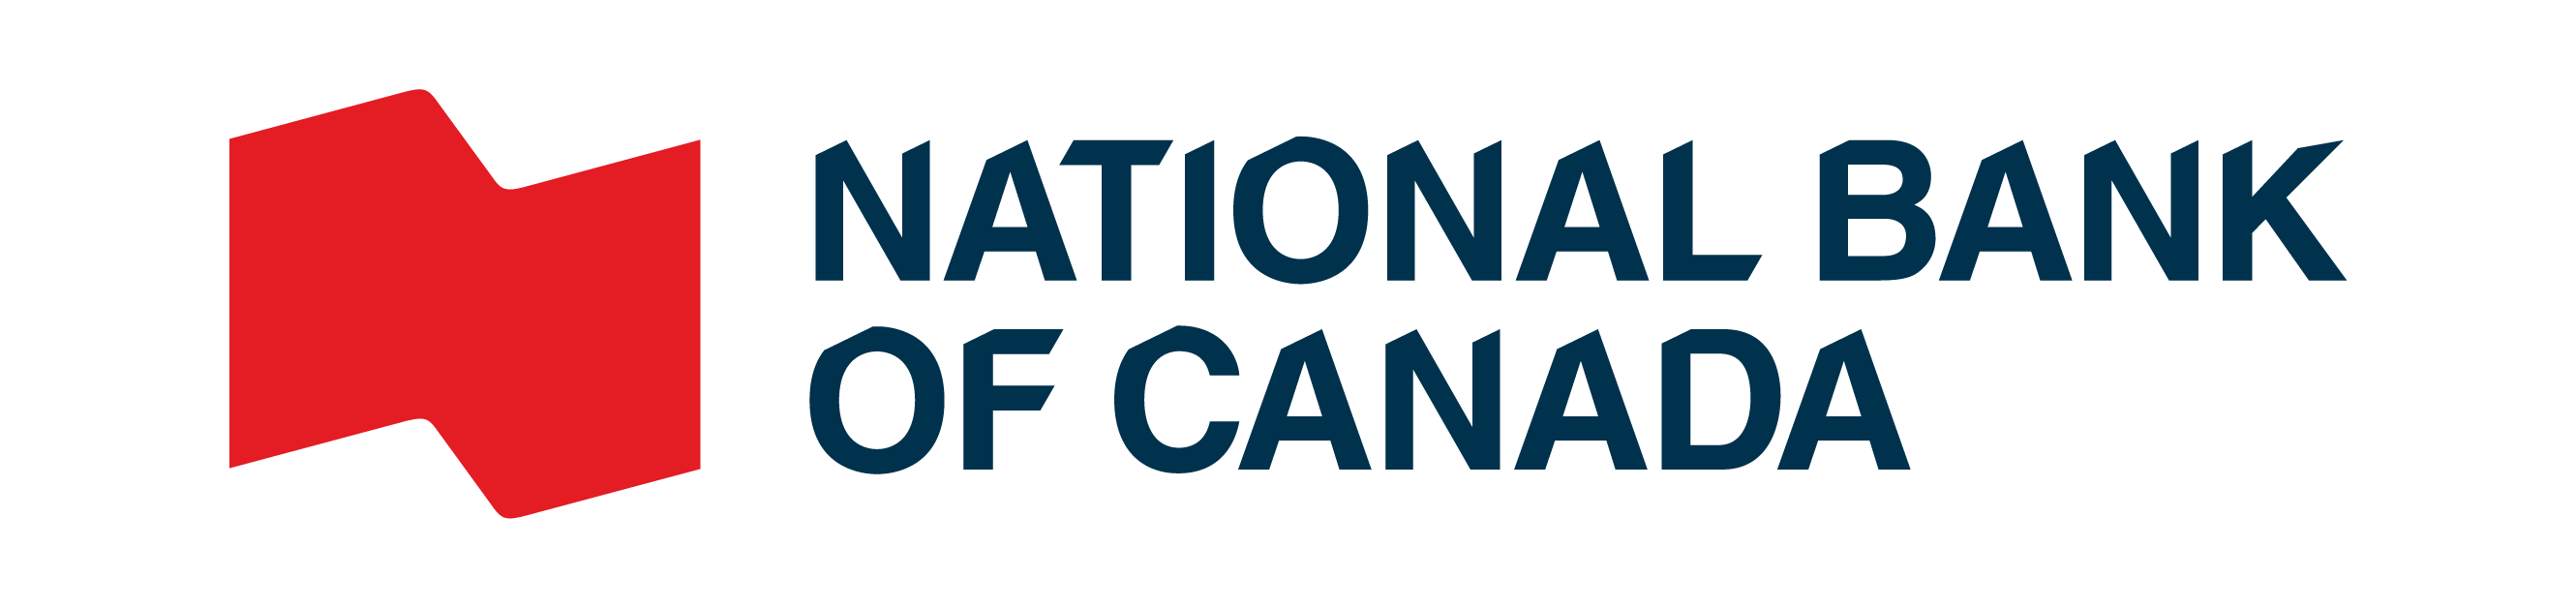 National Bank of Canada 로고